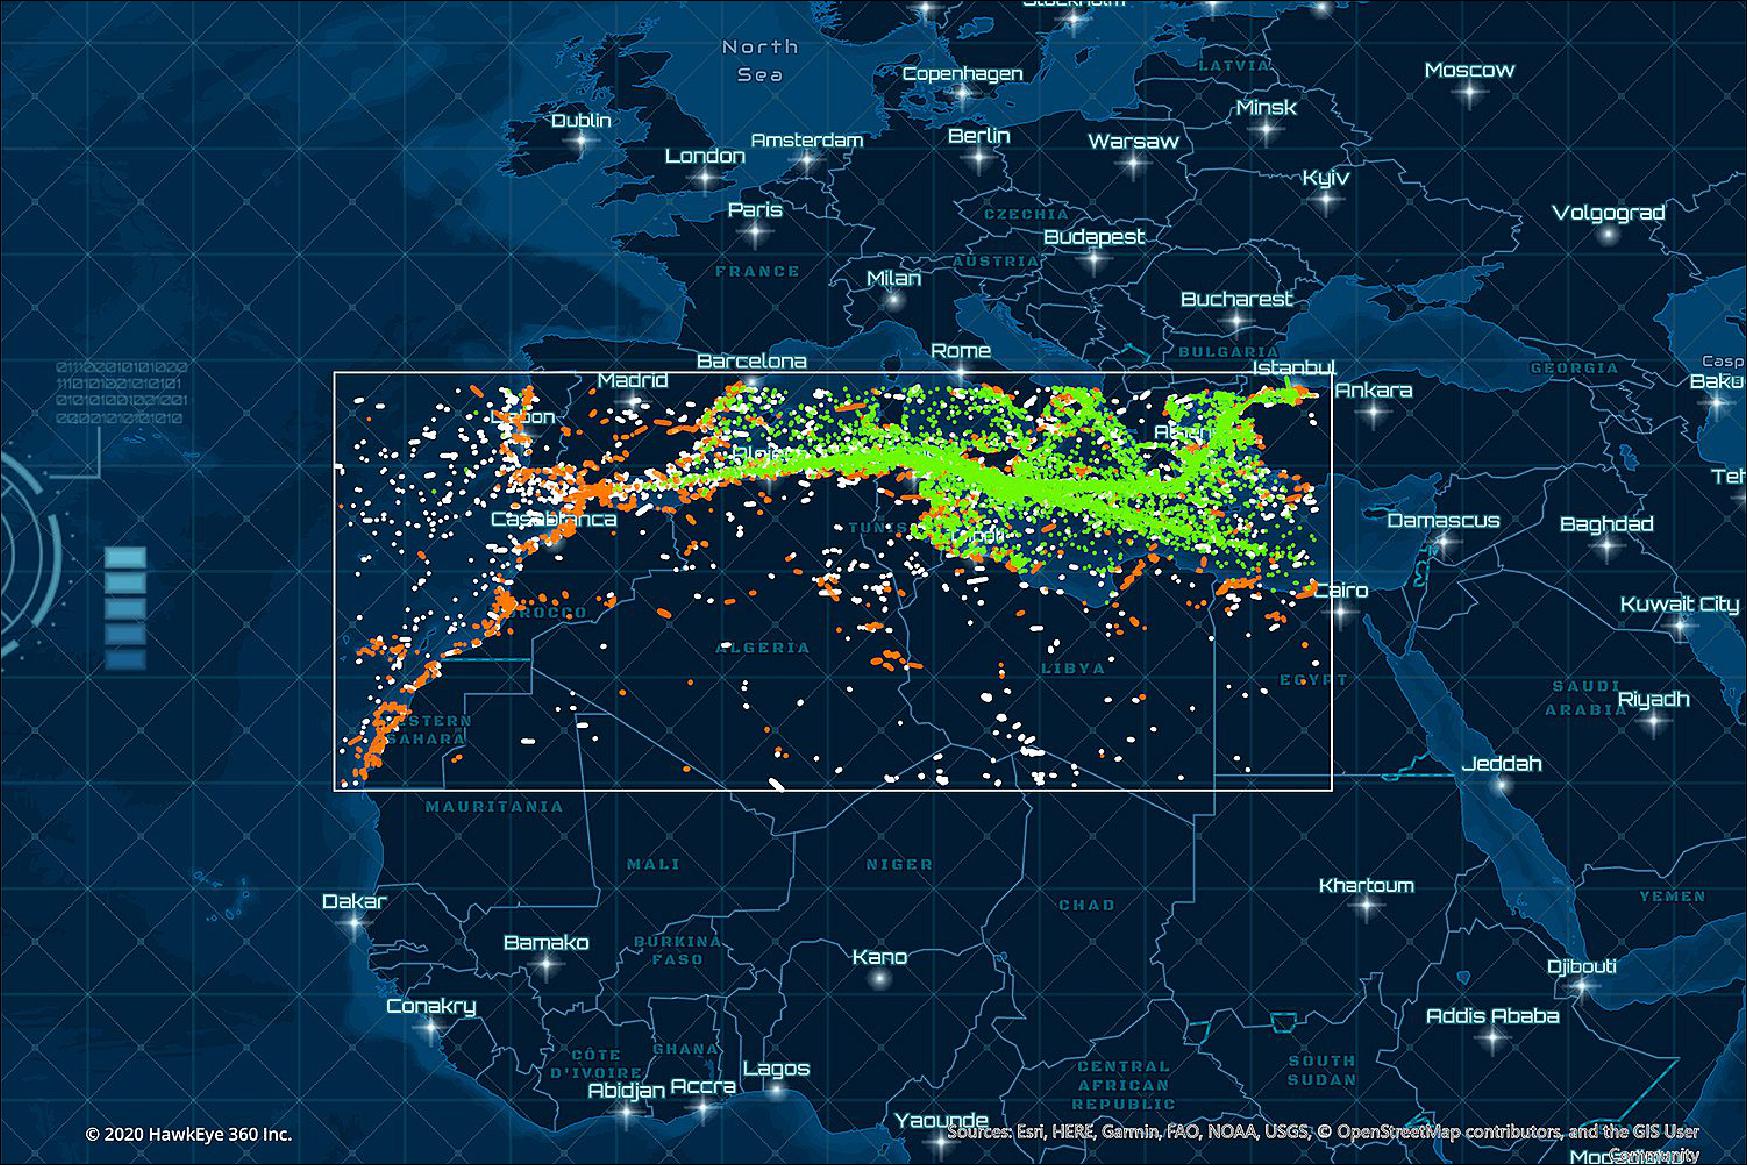 Figure 20: HawkEye 360 Regional Awareness Subscription for the Mediterranean, showing two months of data for three signals (image credit: HawkEye 360)